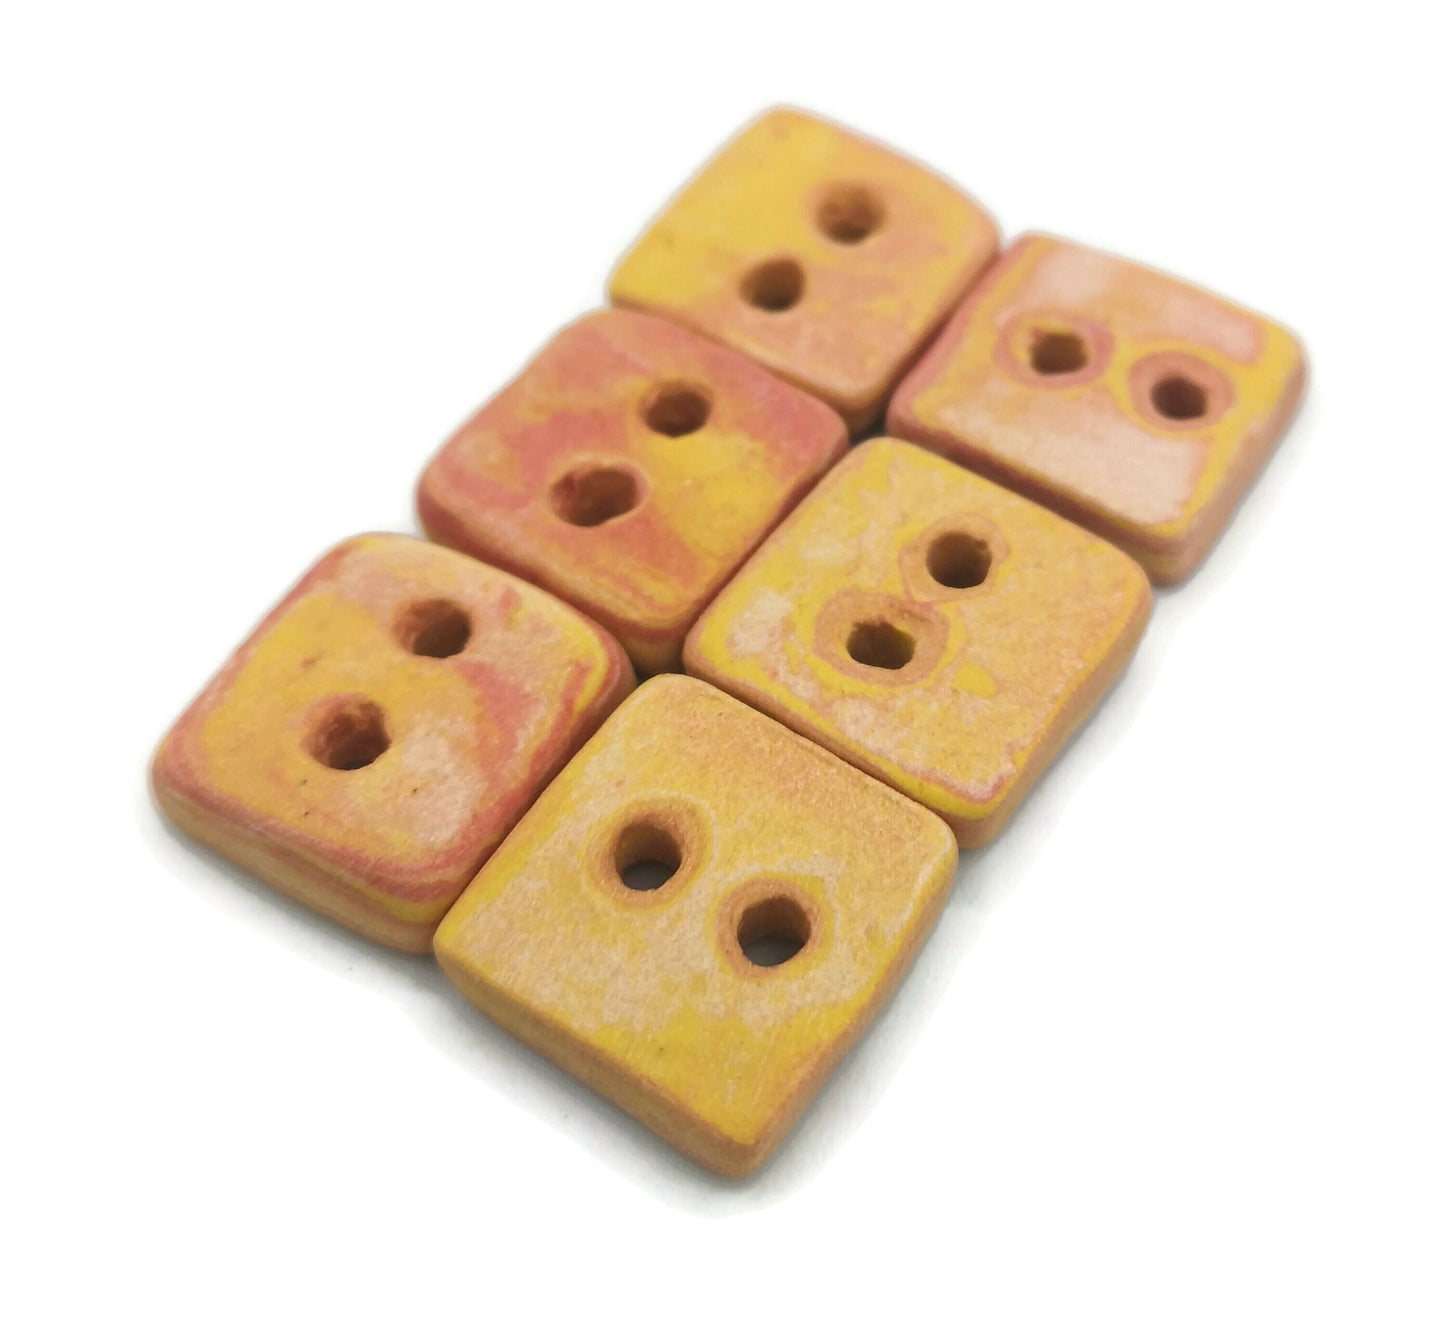 6Pc 20mm Matte Square Sewing Buttons, Handmade Ceramic Orange Flatback Coat Buttons For Clothing, Jacket Buttons, Porcelain Buttons in Clay - Ceramica Ana Rafael